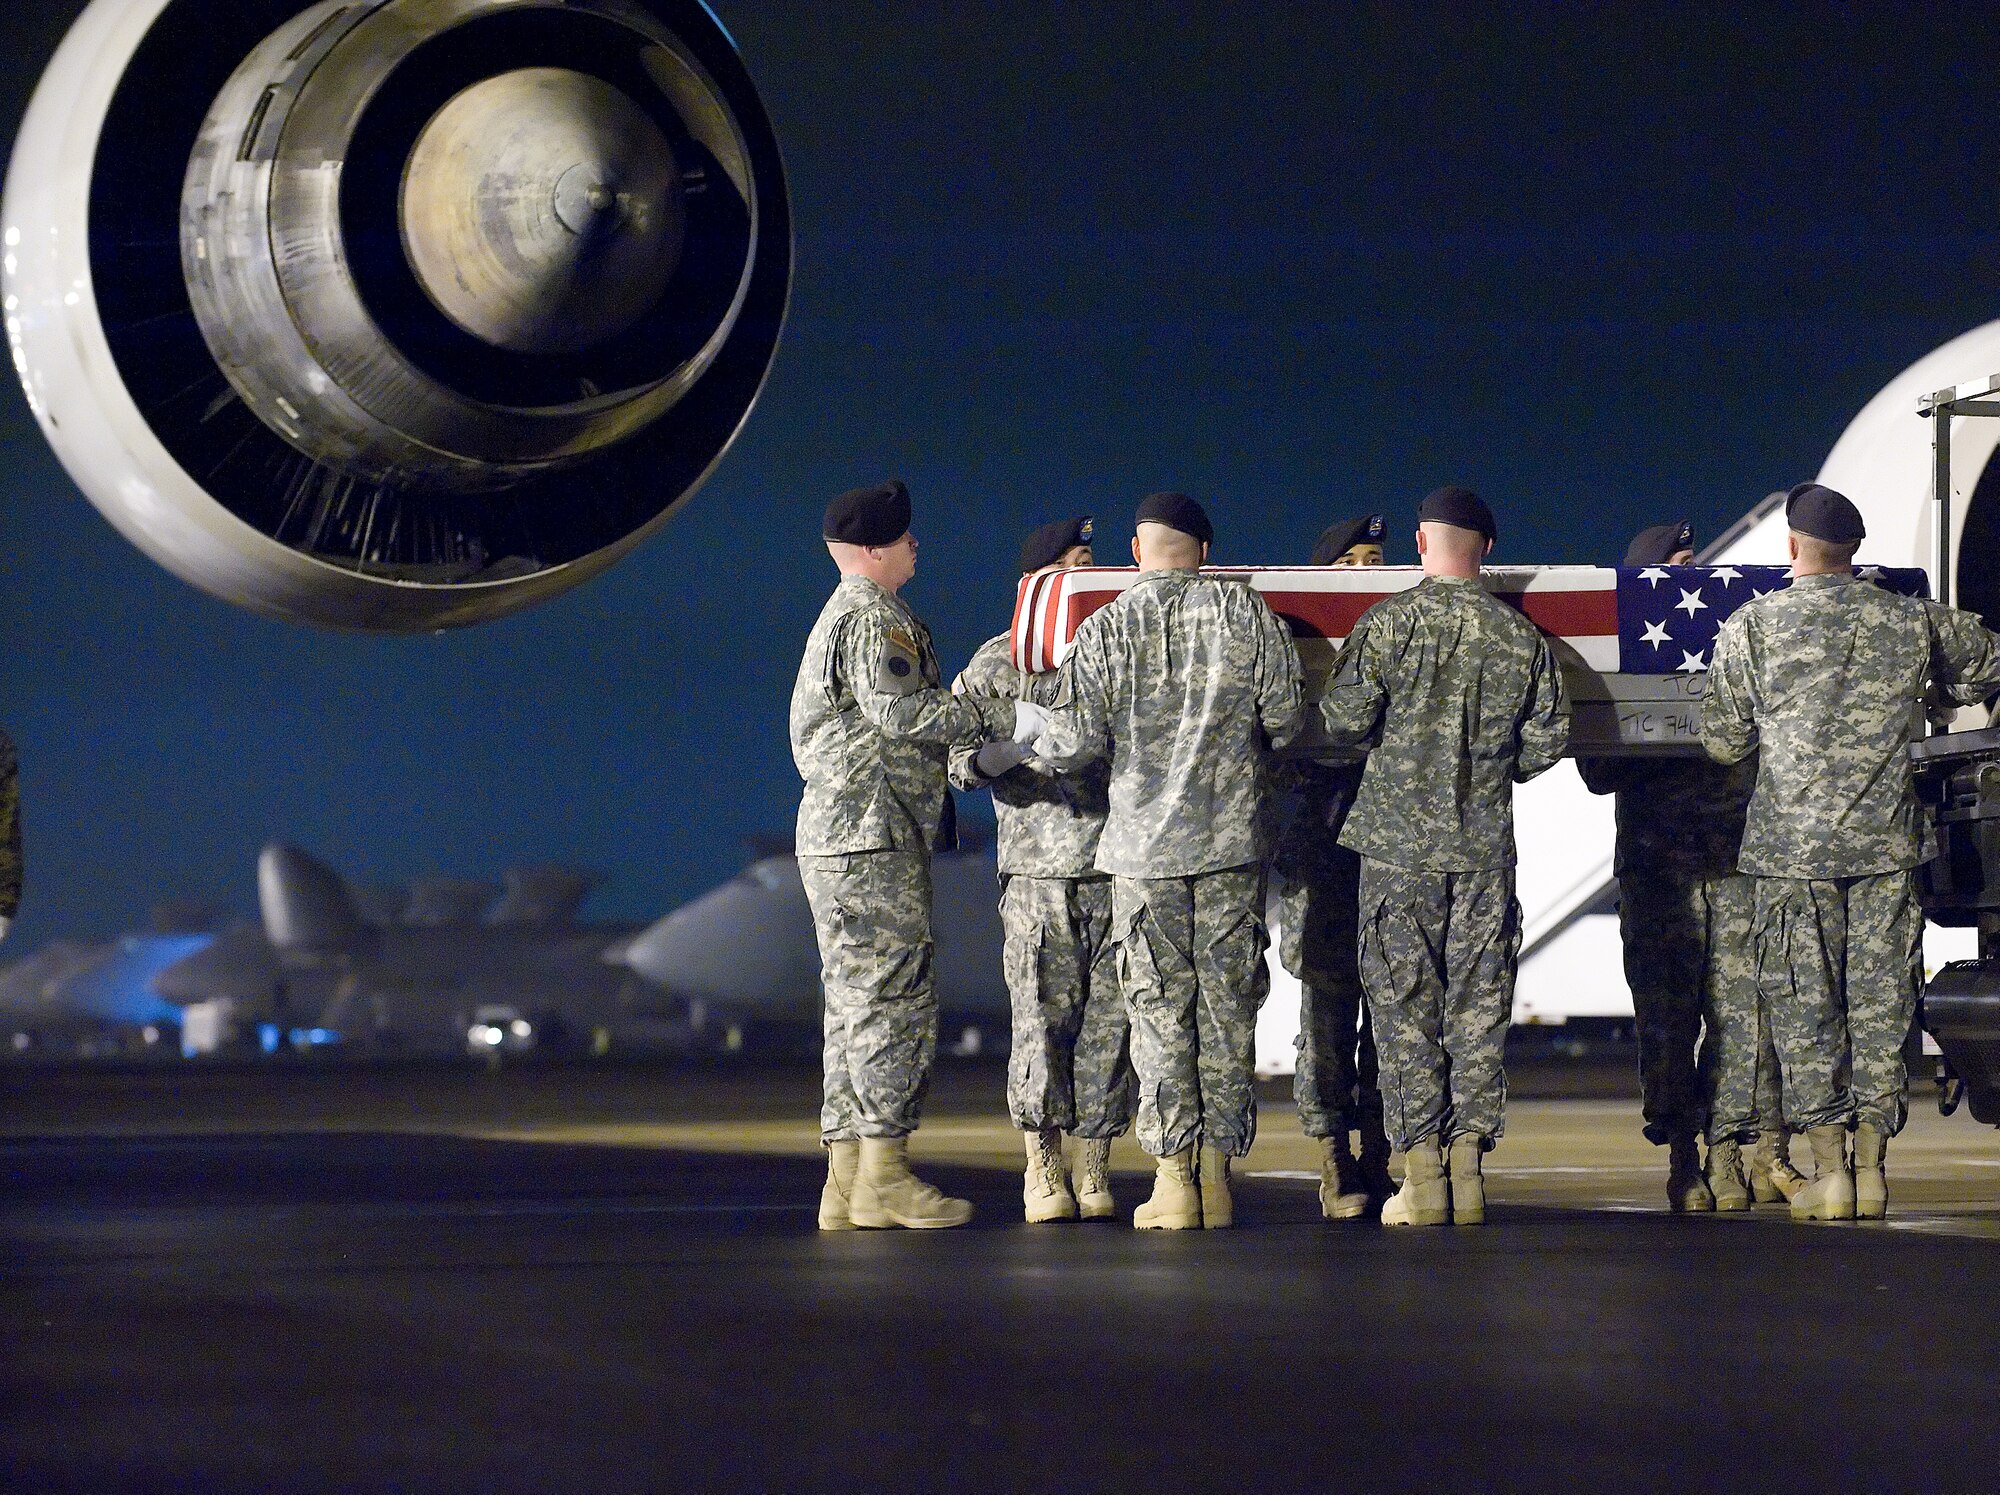 A U.S. Army carry team transfers the remains of Army Specialist Jason A. McLeod of Crystal Lake, Ill., at Dover Air Force Base, Del., Nov. 24, 2009. Specialist McLeod died Nov. 23rd, west of Pashmul, Afghanistan when his unit was attacked with mortar fire. He was assigned to the 704th Brigade Support Battalion, 4th Brigade Combat Team, 4th Infantry Division of Fort Carson, Colo. ( U.S. Air Force photo by Brianne Zimny)